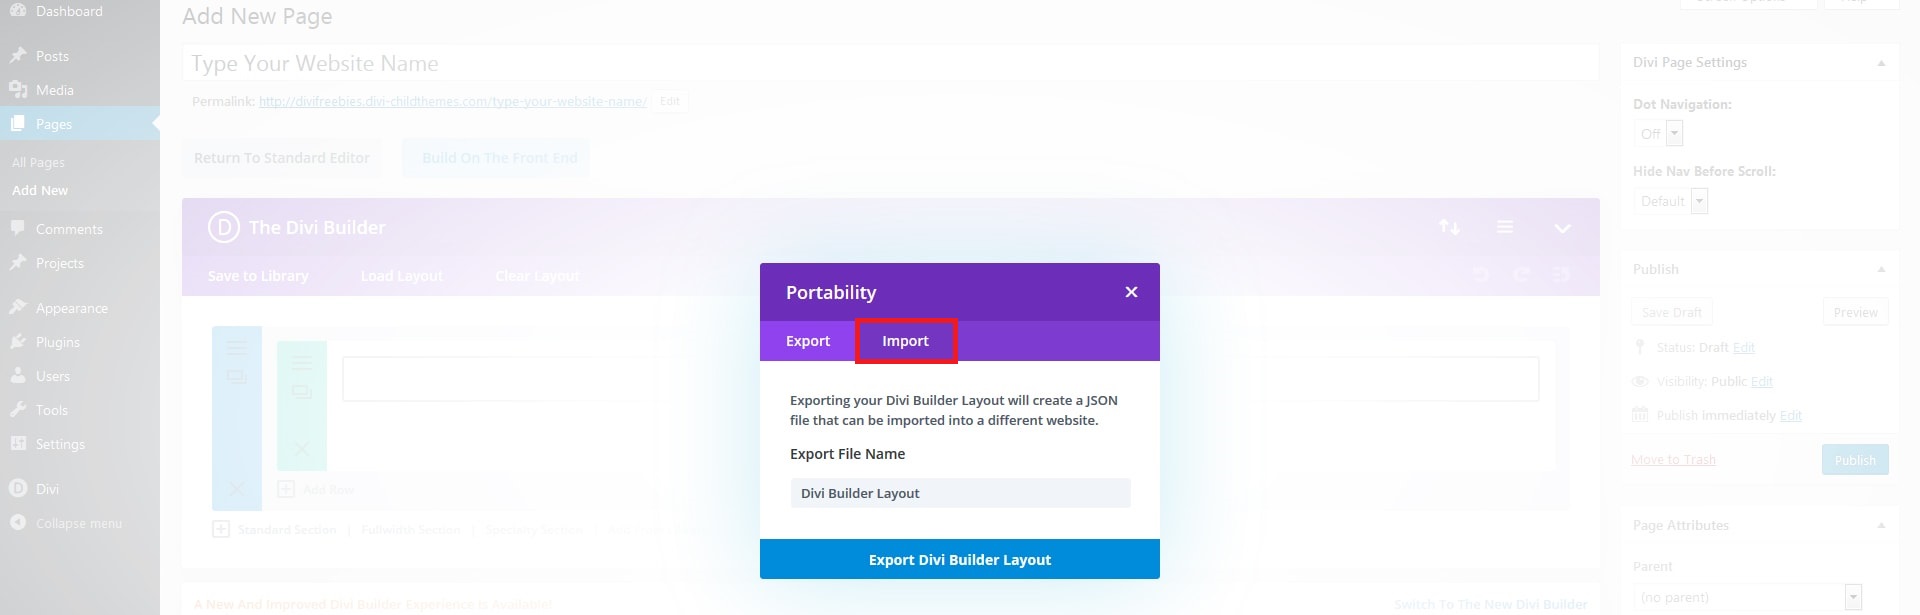 How to installing divi layout through divi page imports option